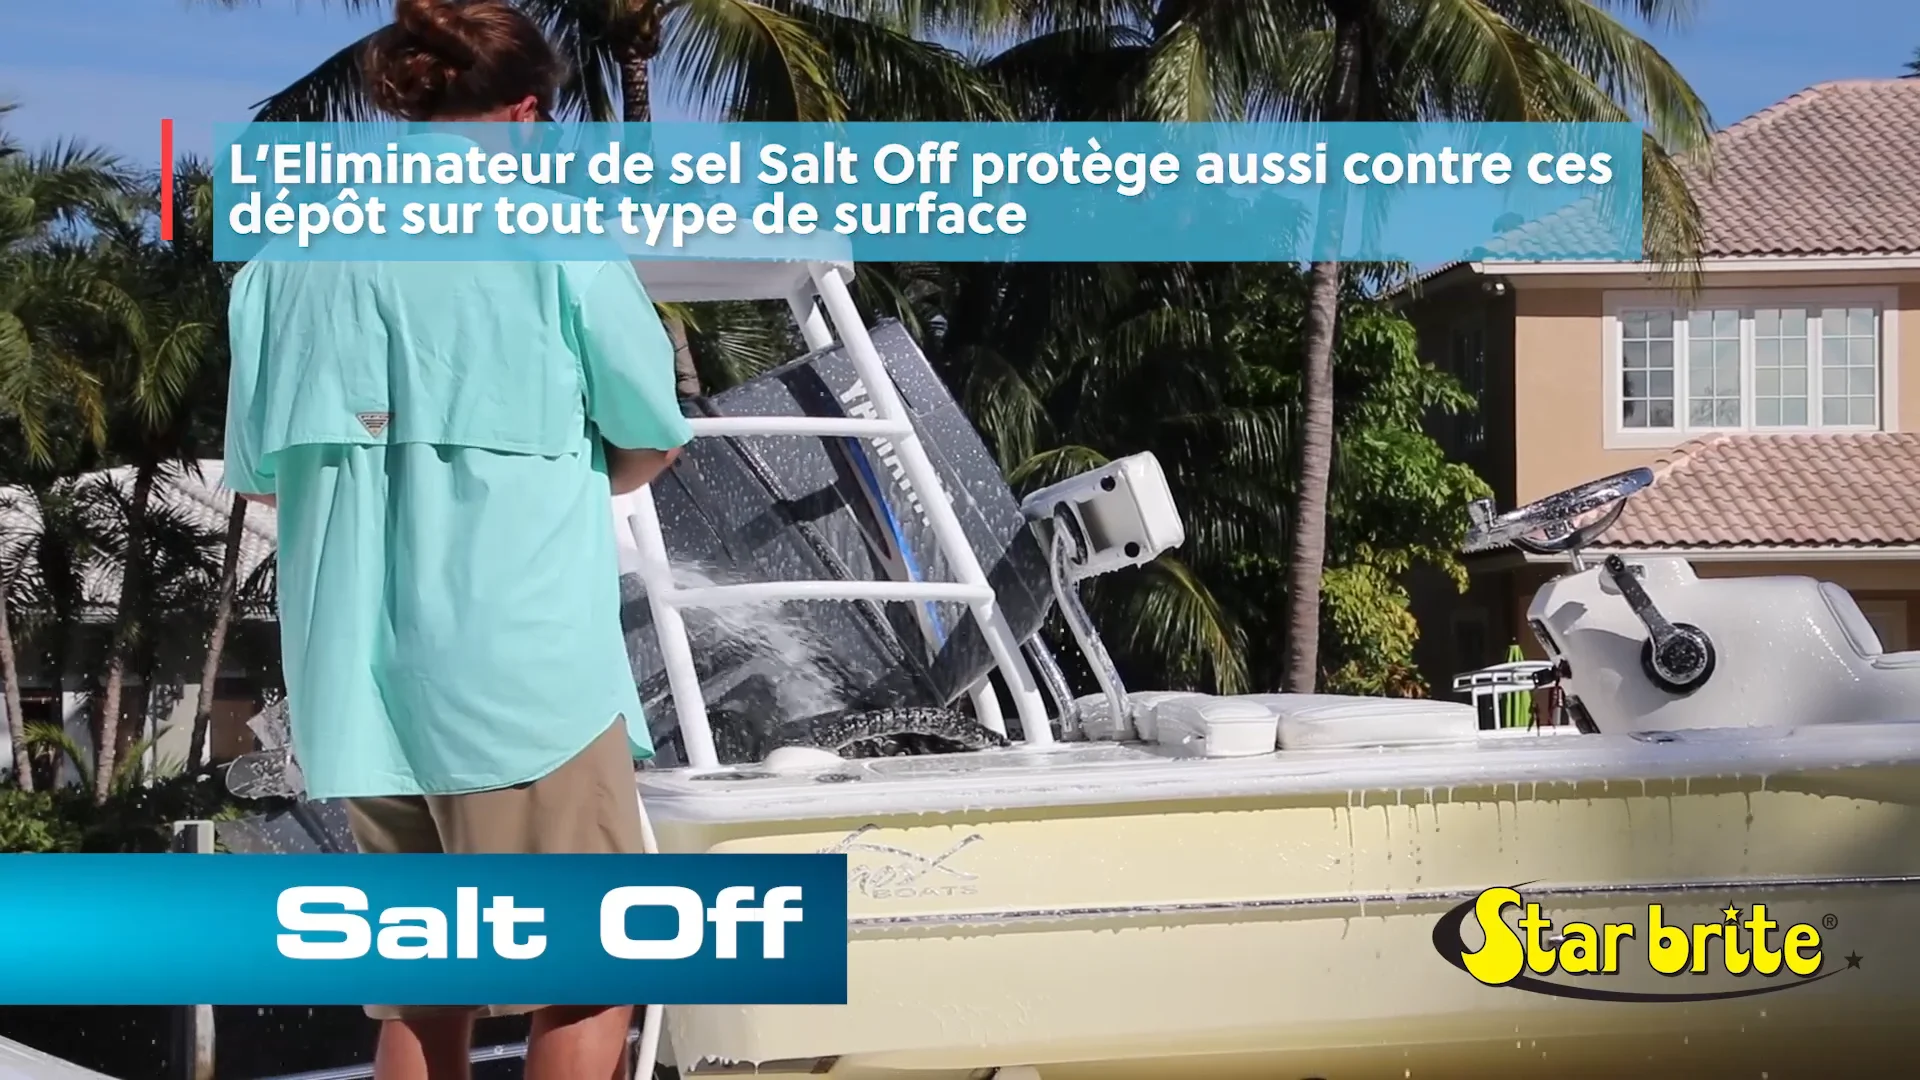 How to Clean and Flush a Boat with Star brite Salt Off by Rick Murphy on  Vimeo